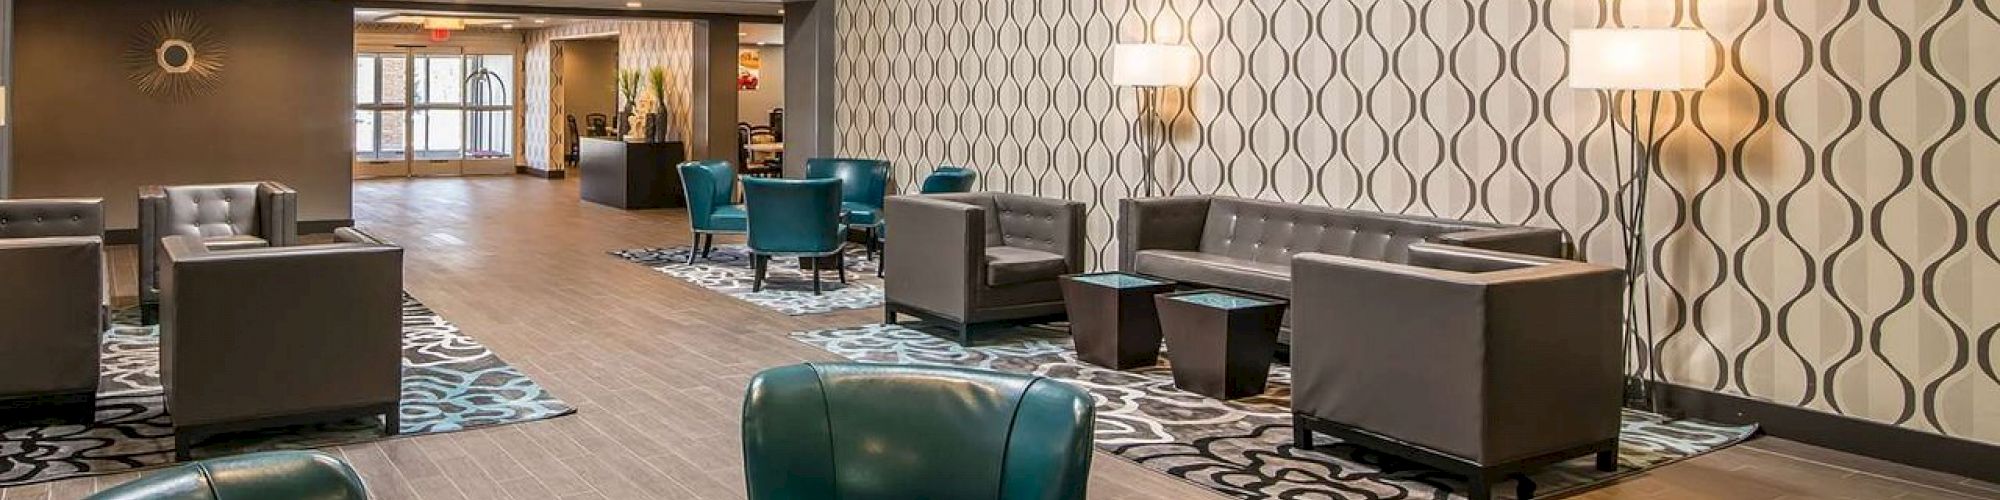 A modern hotel lobby with teal chairs, patterned carpet, and textured walls. The space has ample seating, a high ceiling, and ambient lighting.